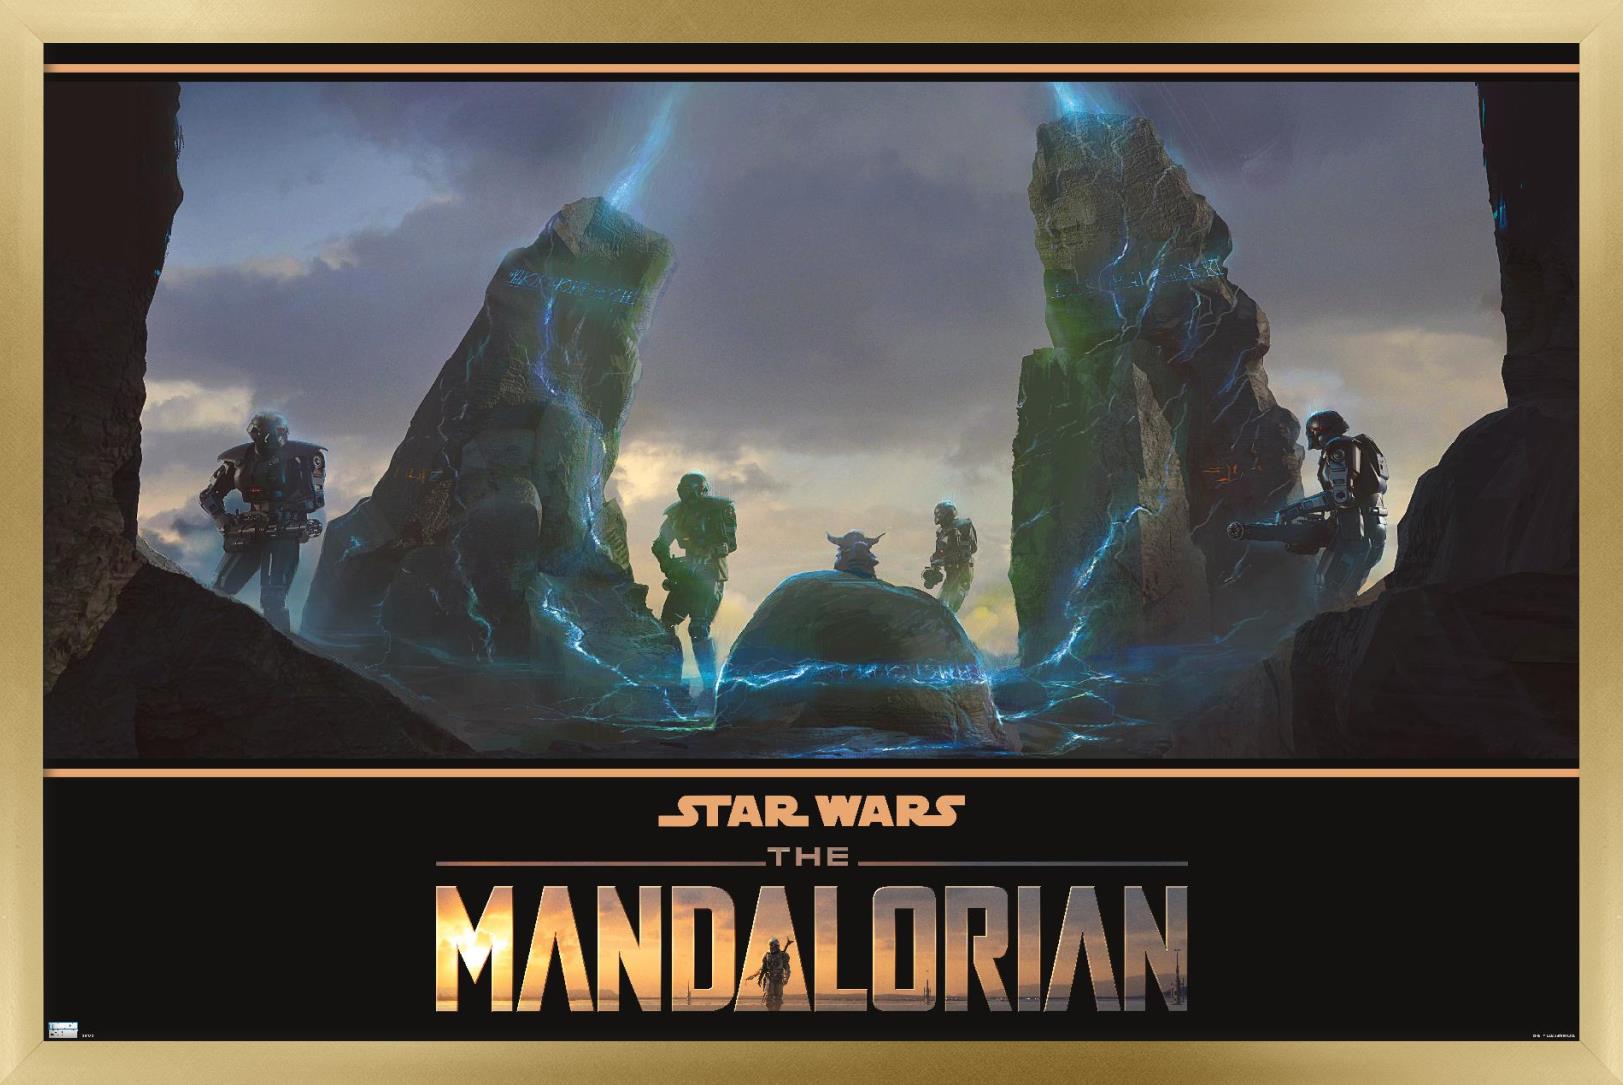 Star Wars: The Mandalorian Season 2 - Seeing Stone Wall Poster, 22.375" x 34", Framed - image 1 of 5